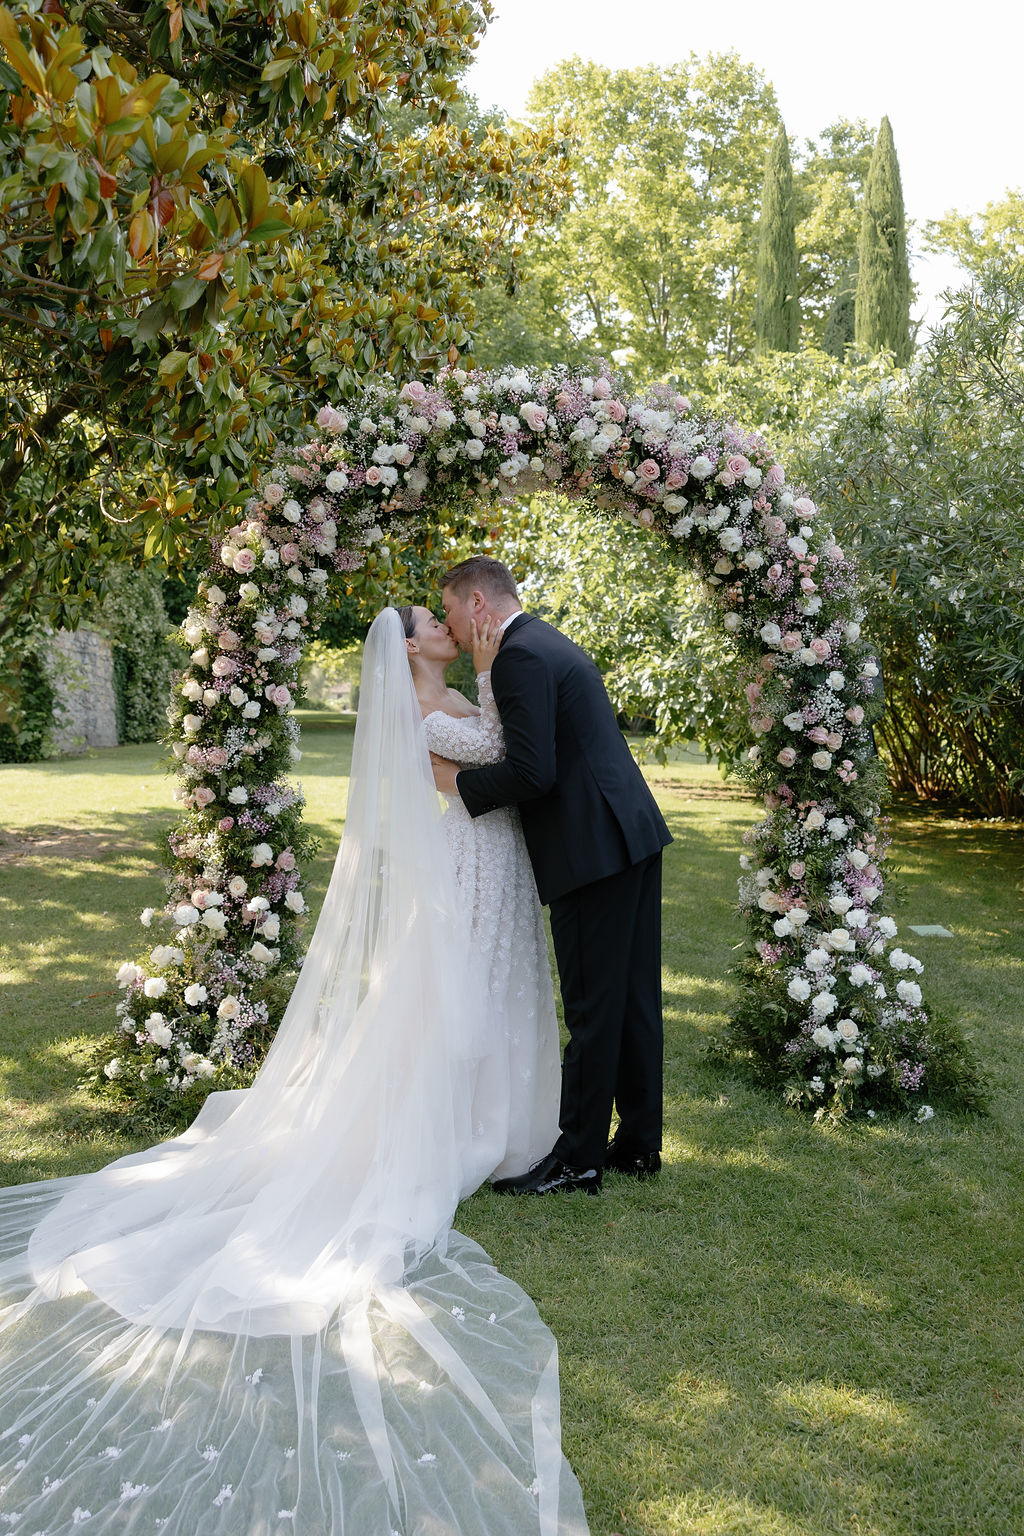 Romantic first kiss at rose garden wedding in France 